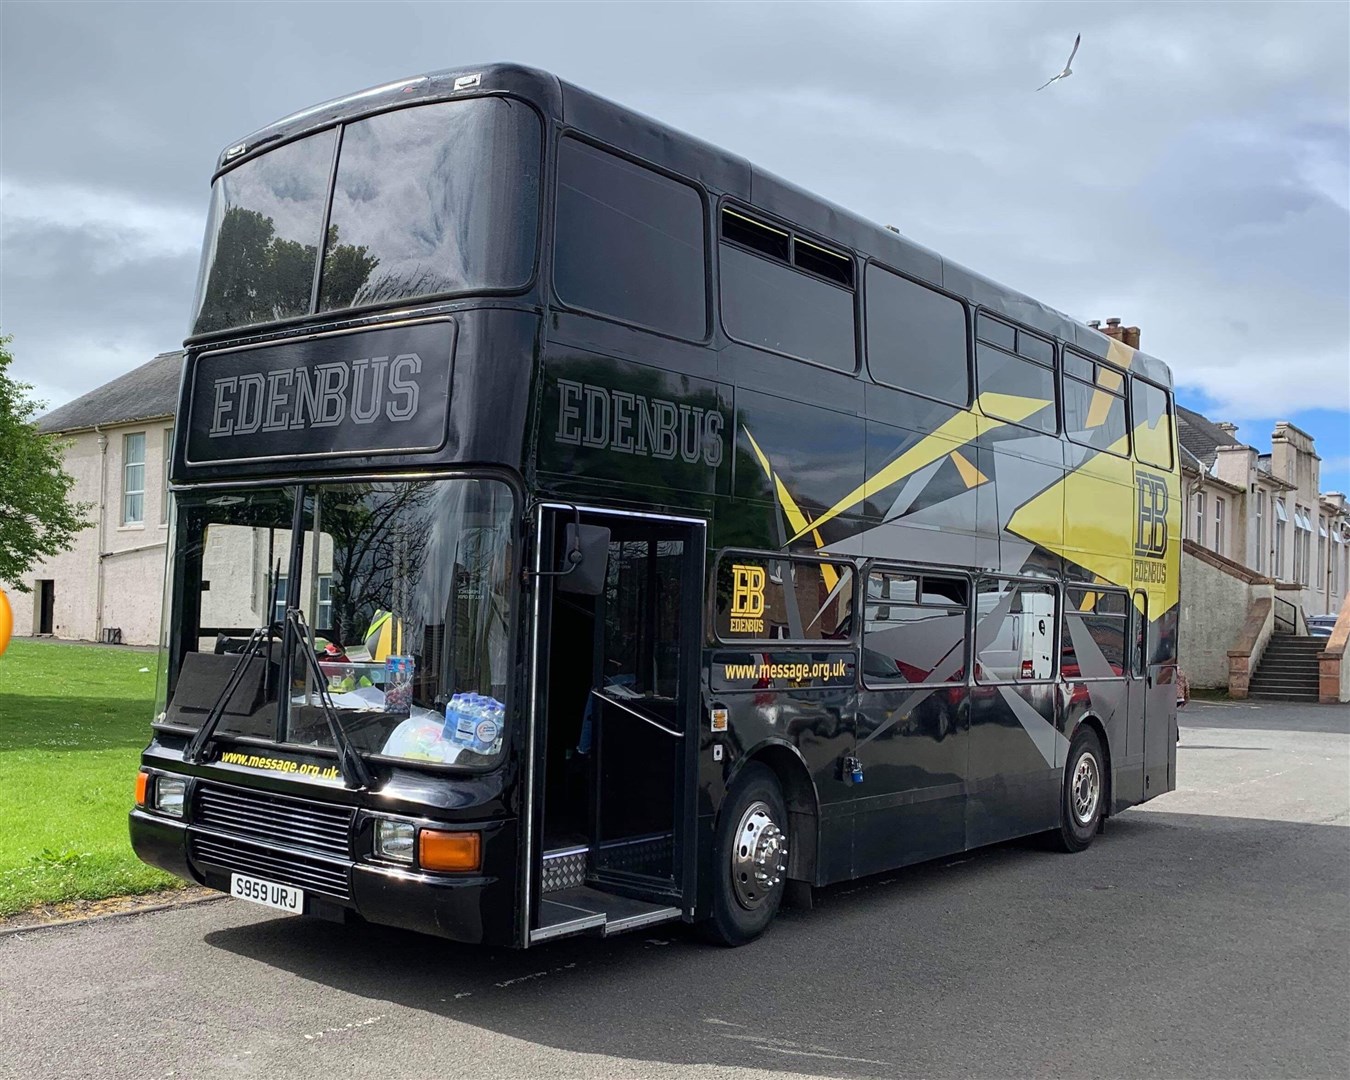 The Eden Bus will tour in and around Elgin next week.